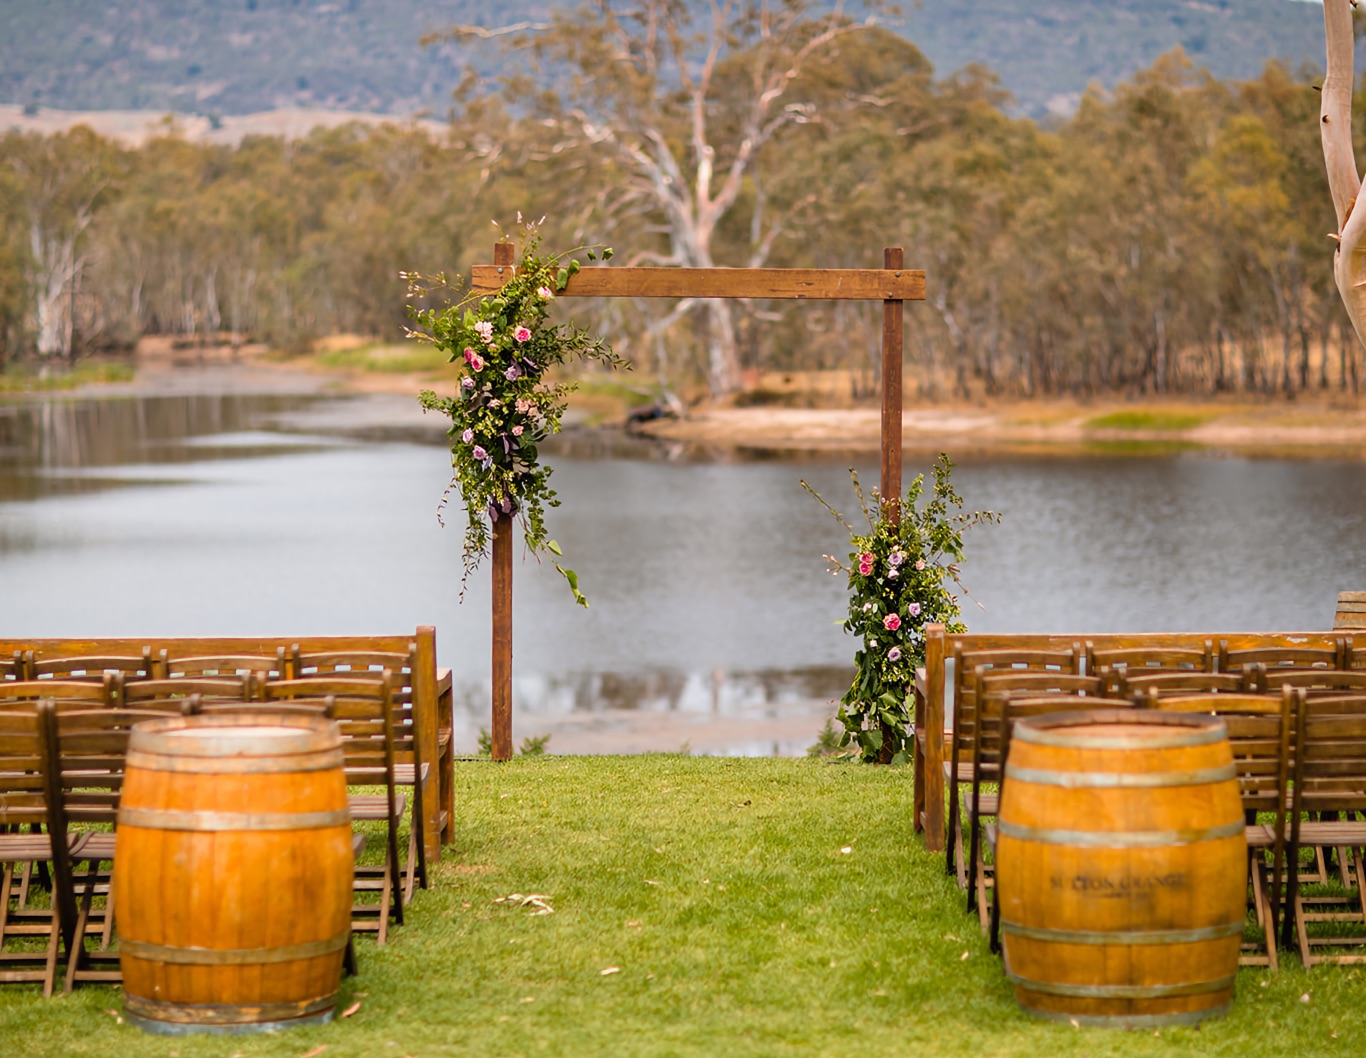 Wedding asile and archway overlooking water.